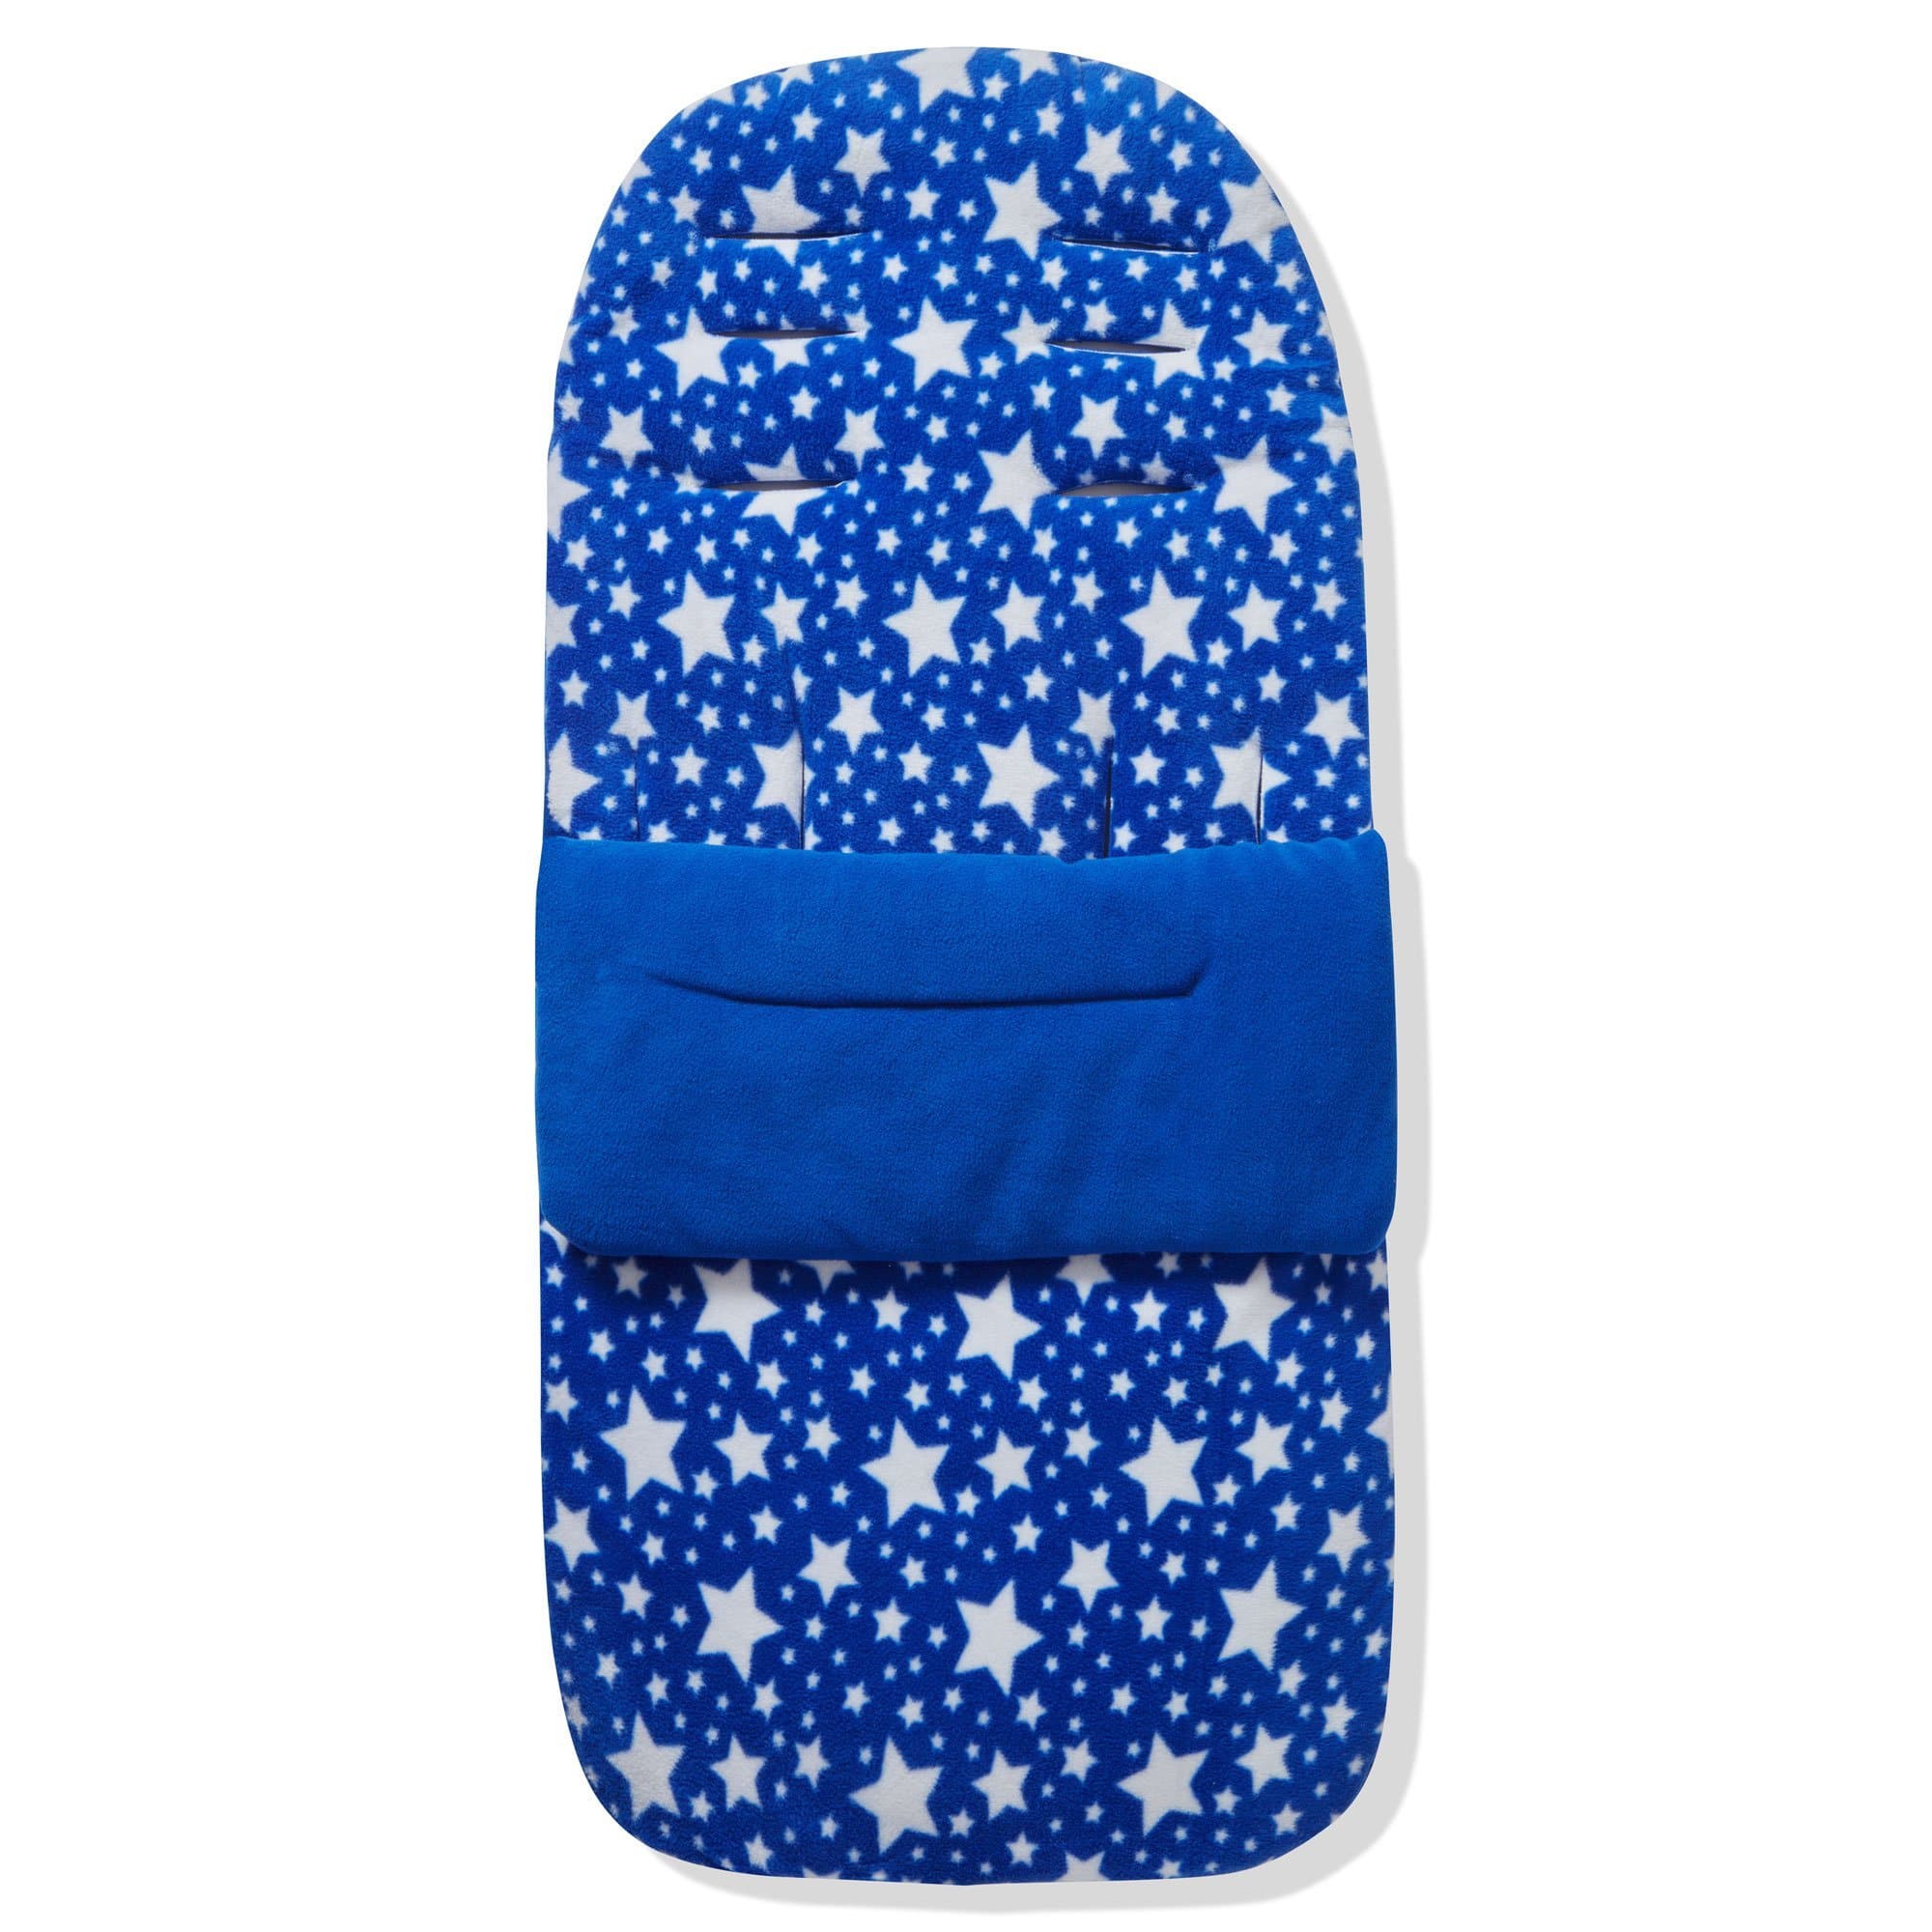 Fleece Footmuff / Cosy Toes Compatible with Diono - Blue Star / Fits All Models | For Your Little One